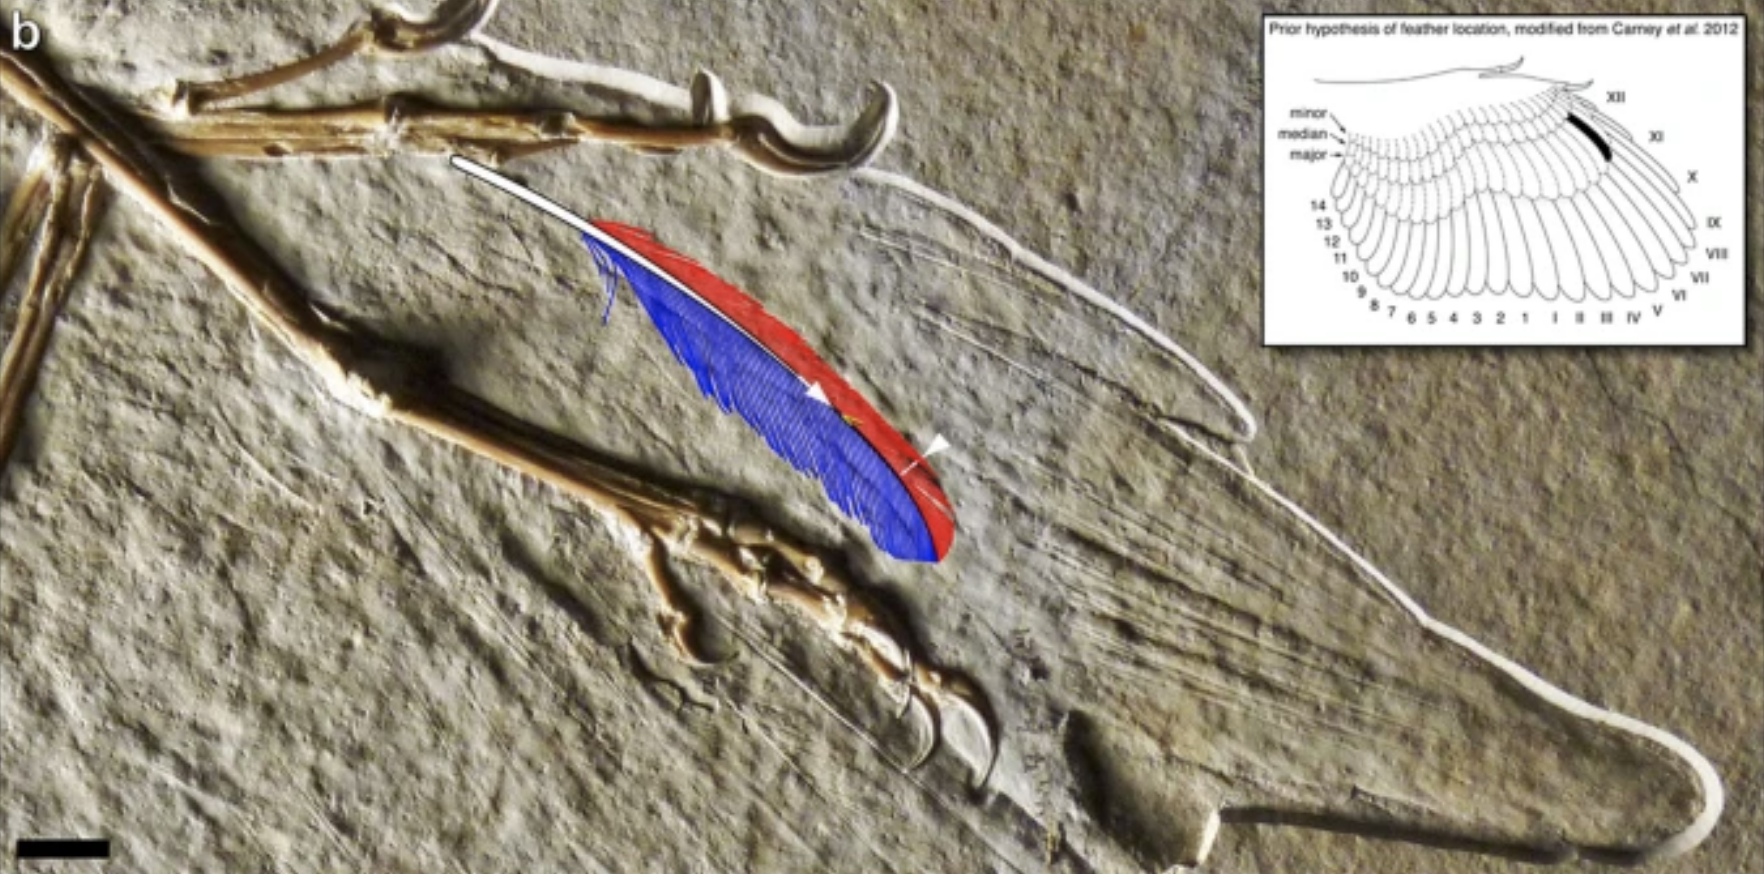 Oldest Fossil Feather Ever Found Came From The Archaeopteryx Dinosaur,  Study Confirms : ScienceAlert